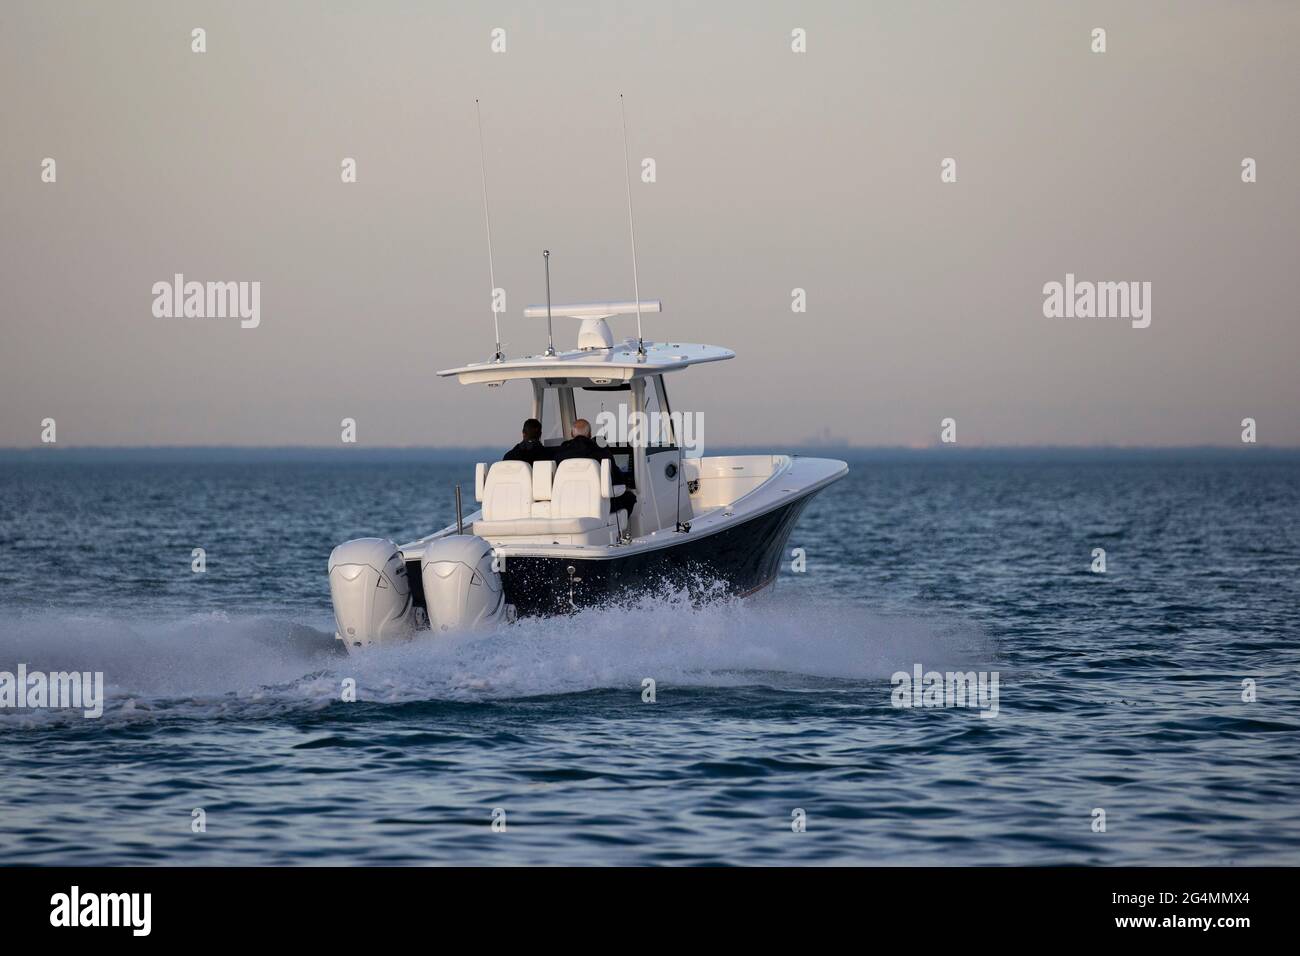 A center console boat cruising alone on an empty lake. Stock Photo